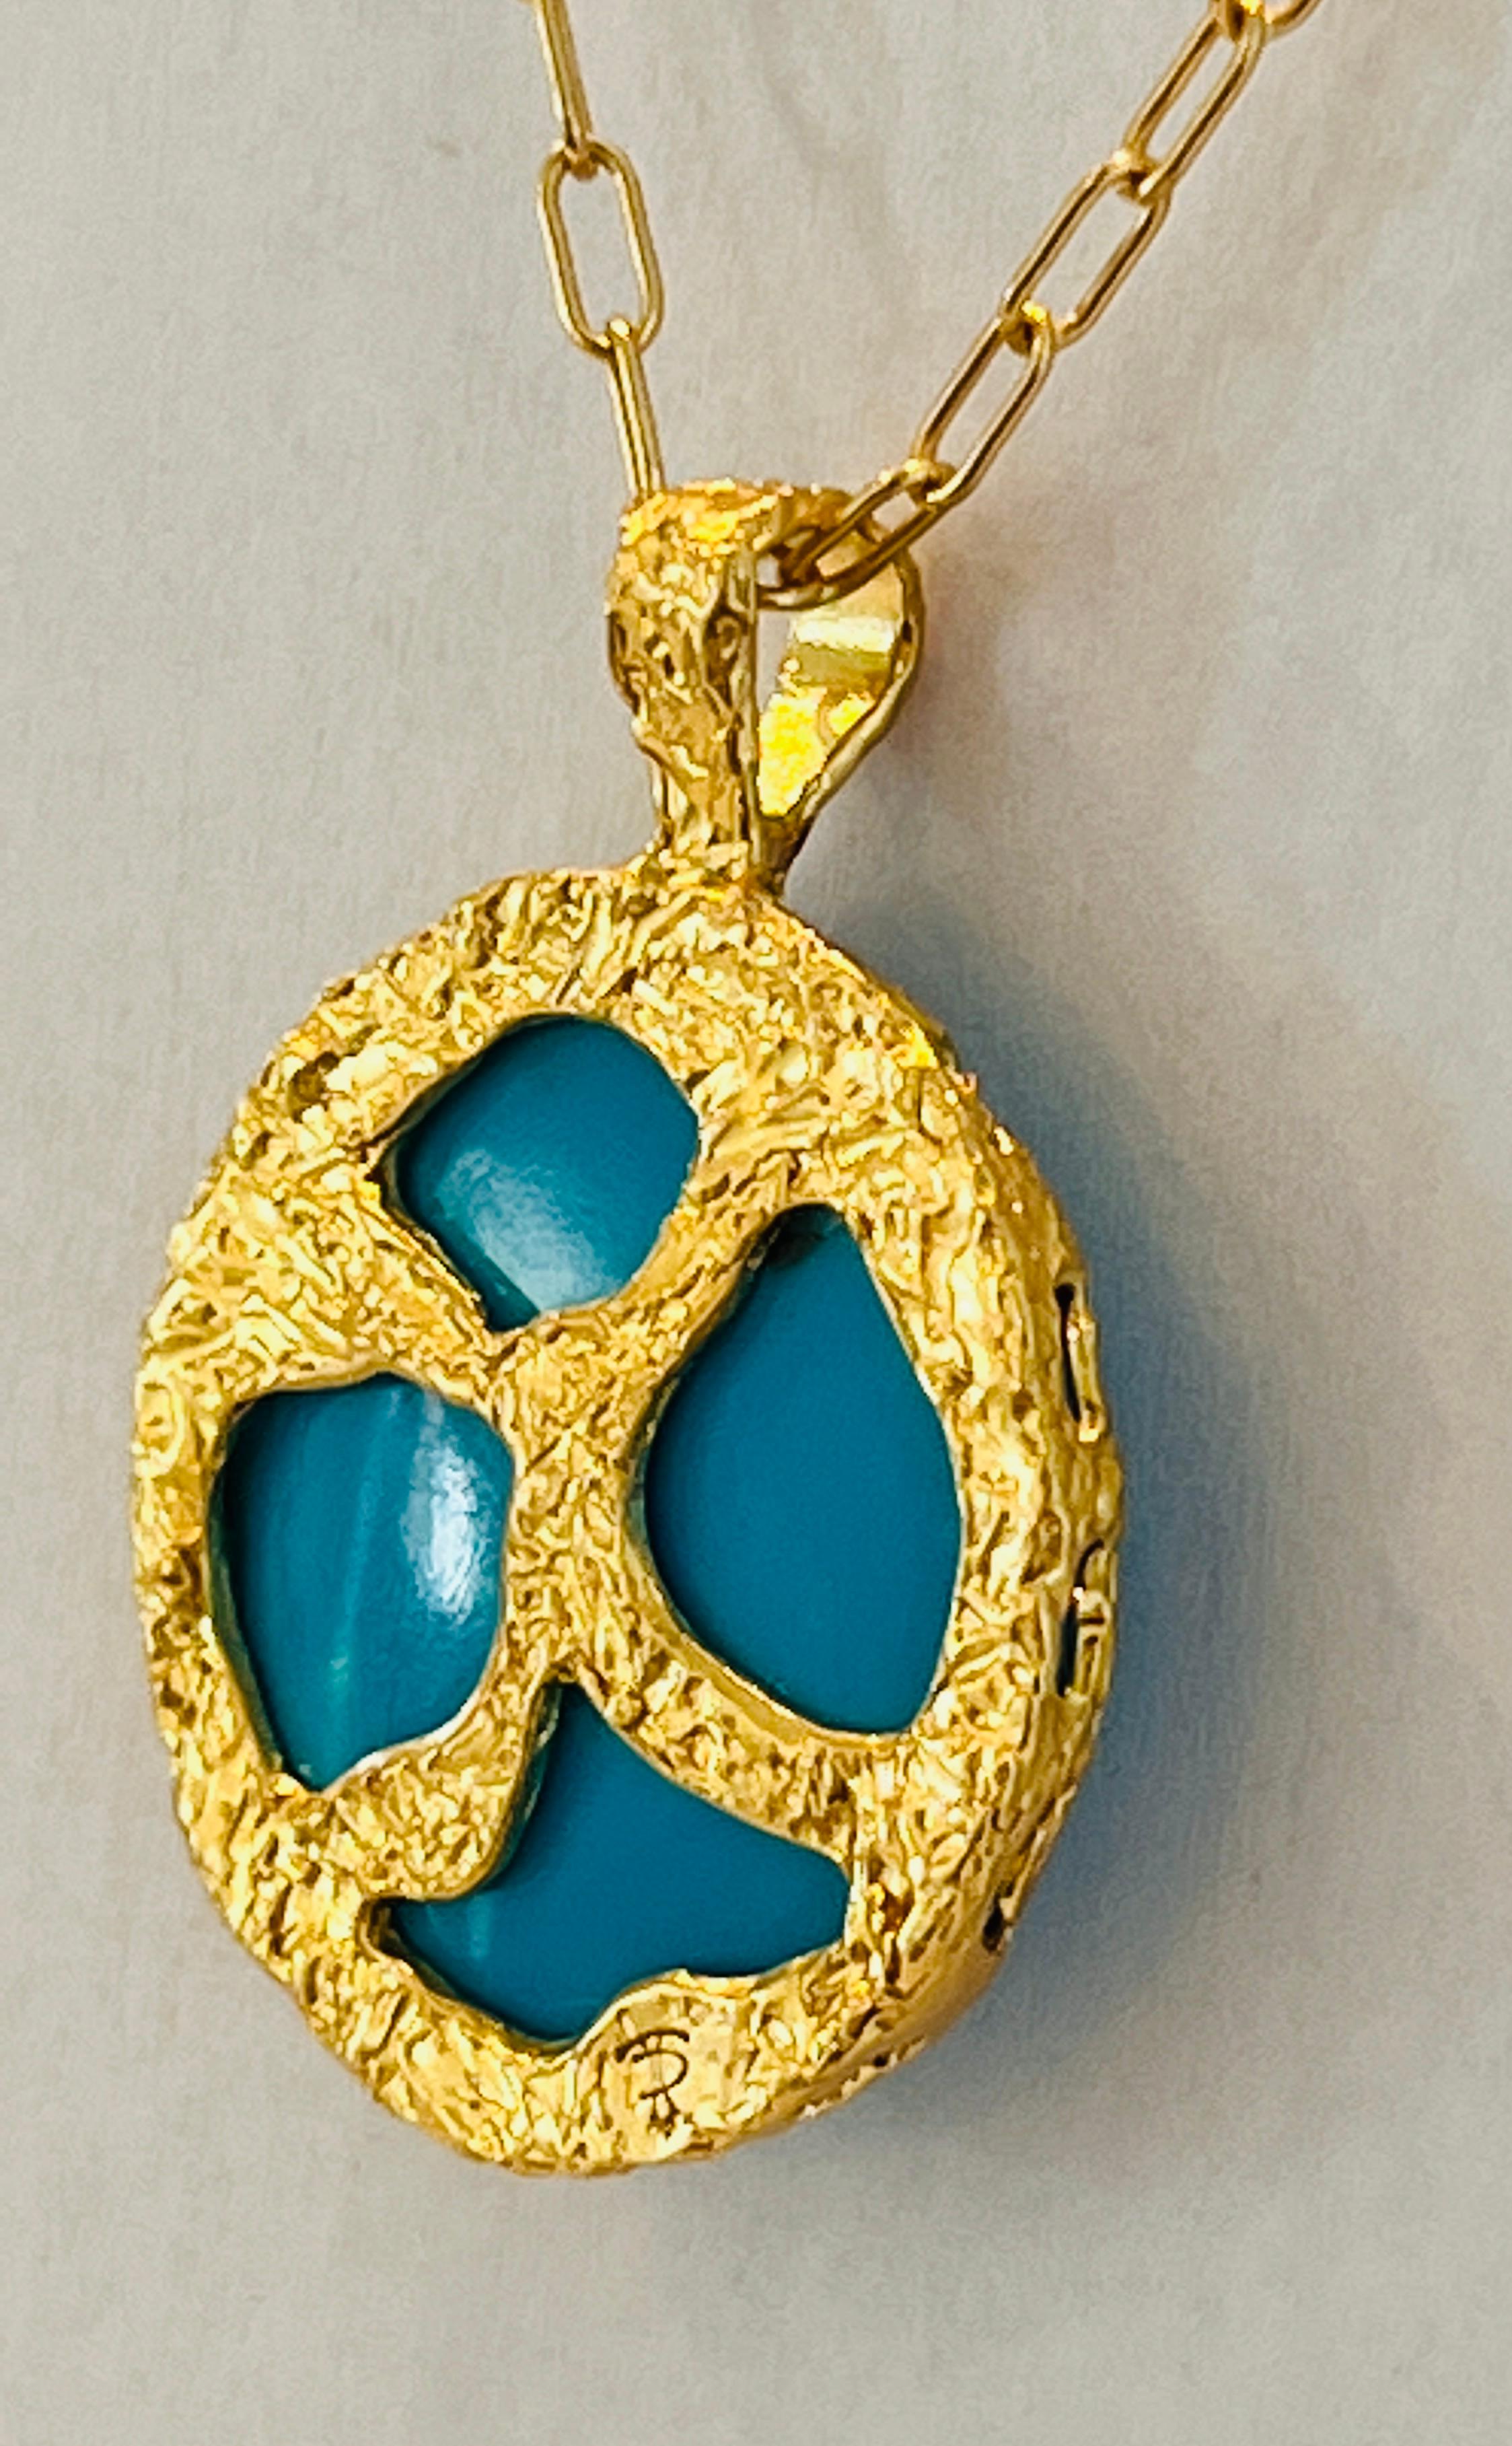 Turquoise Handmade Pendant in 22k Gold, by Tagili 4